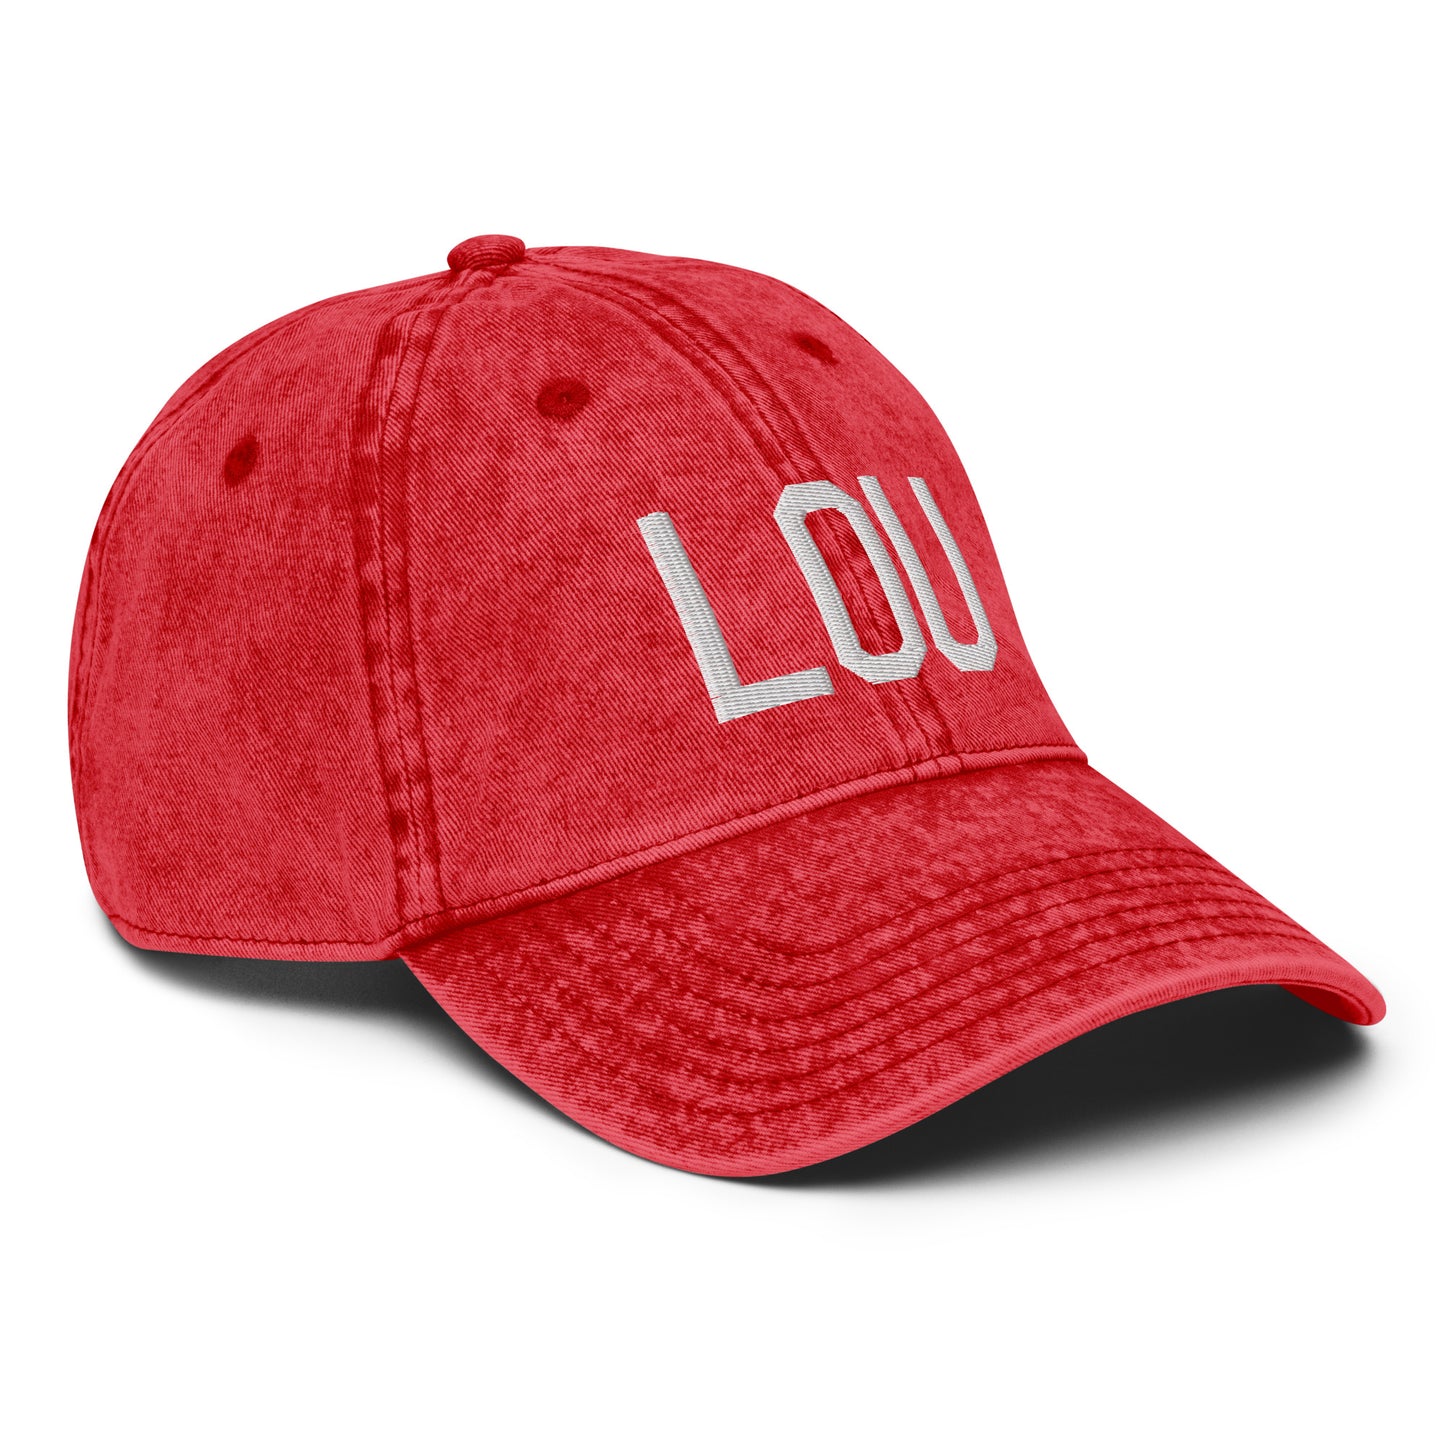 Airport Code Twill Cap - White • LOU Louisville • YHM Designs - Image 24